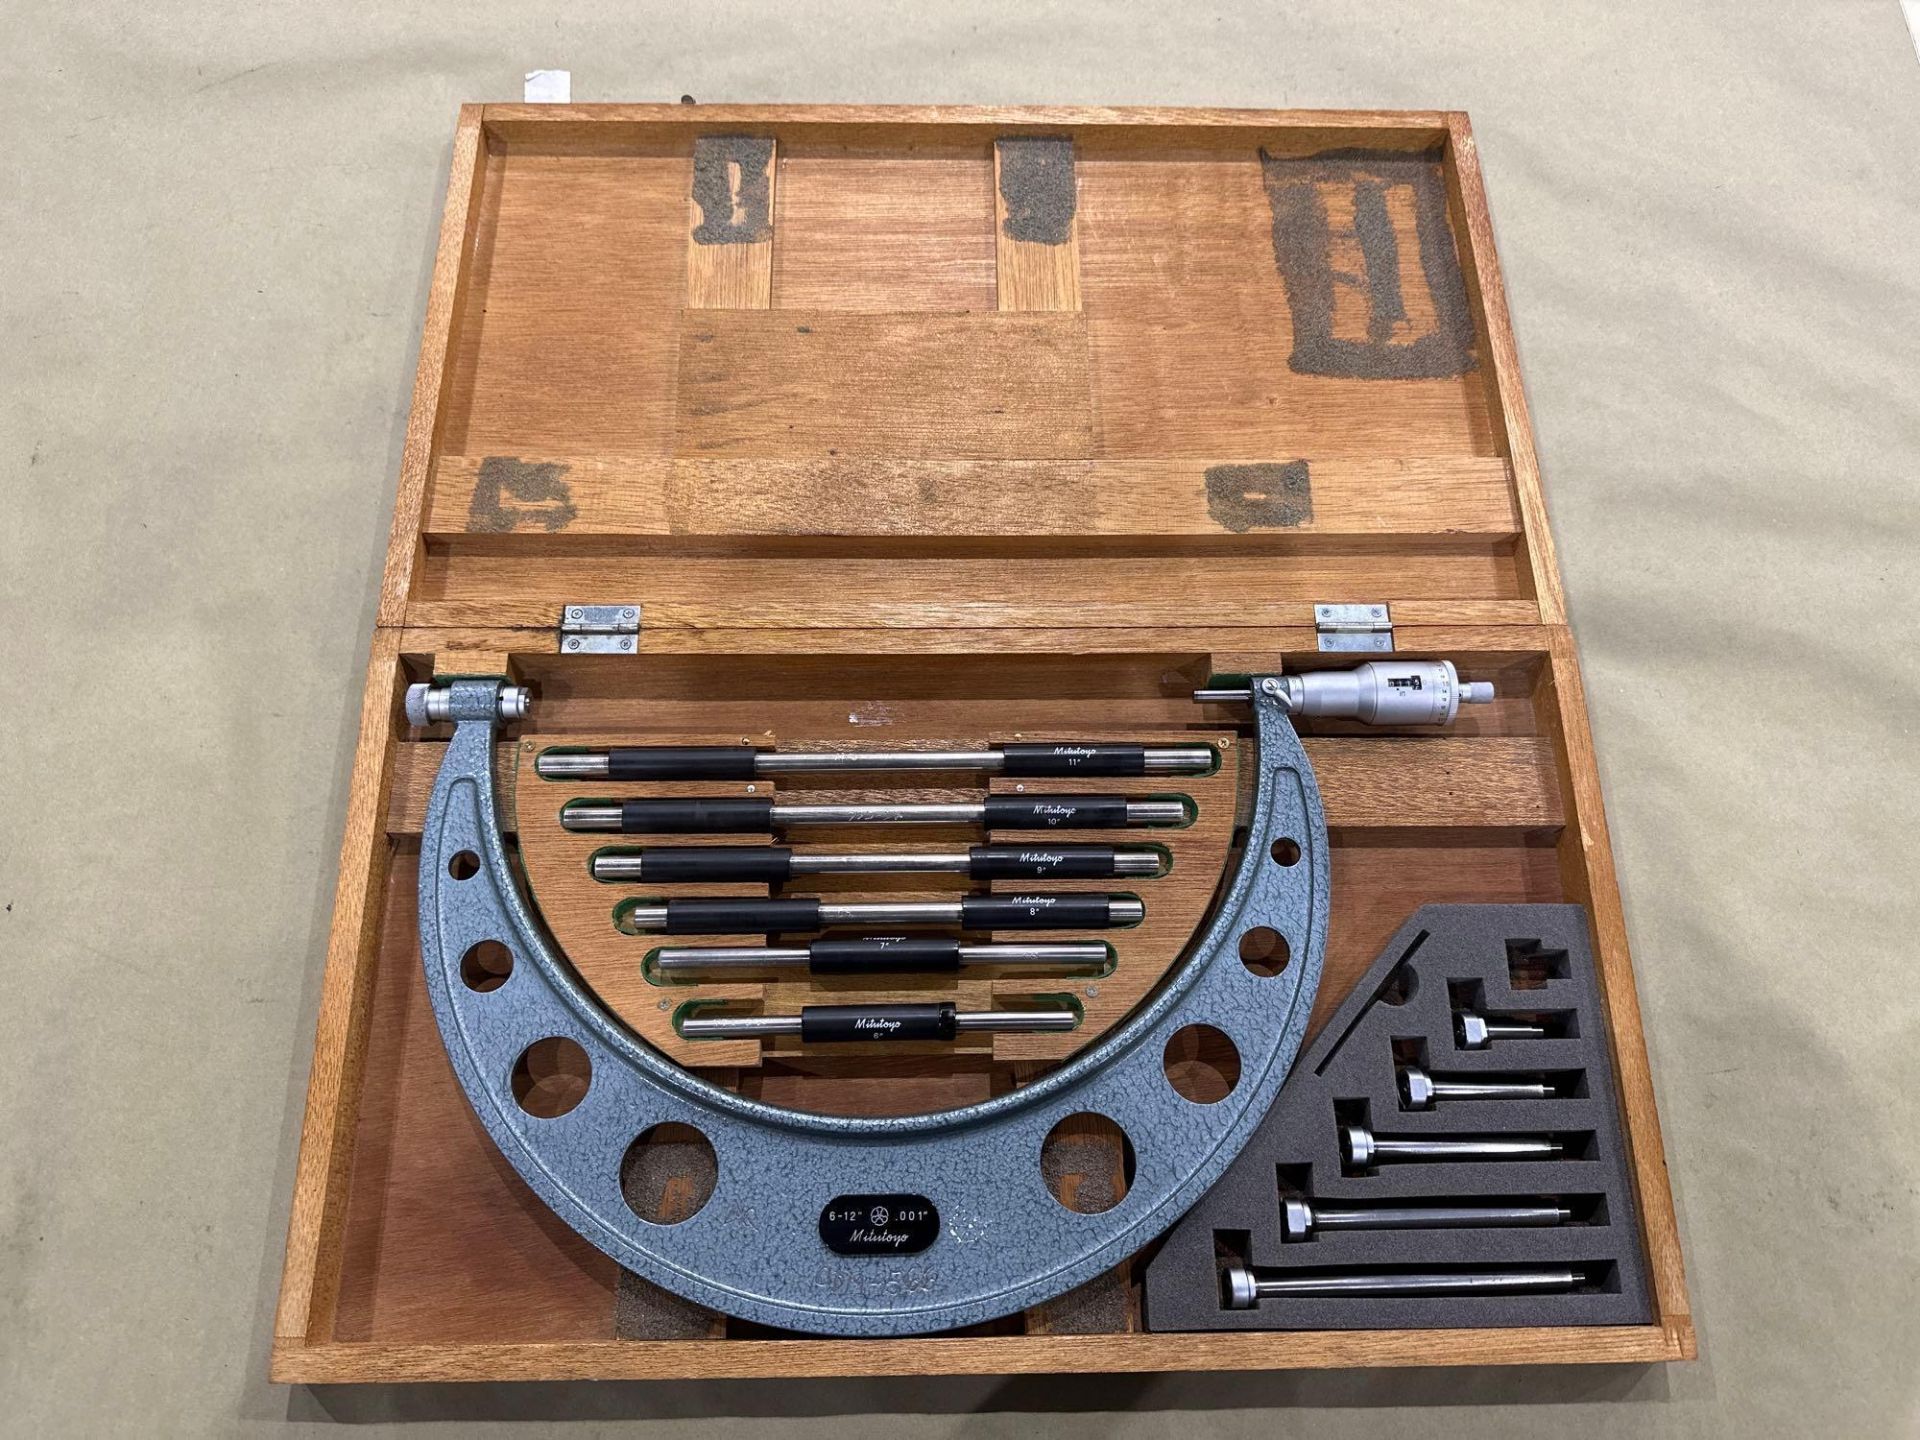 Mitutoyo OD Micrometer No. 204-138, Range 6-12" with interchangeable anvils - Image 3 of 7